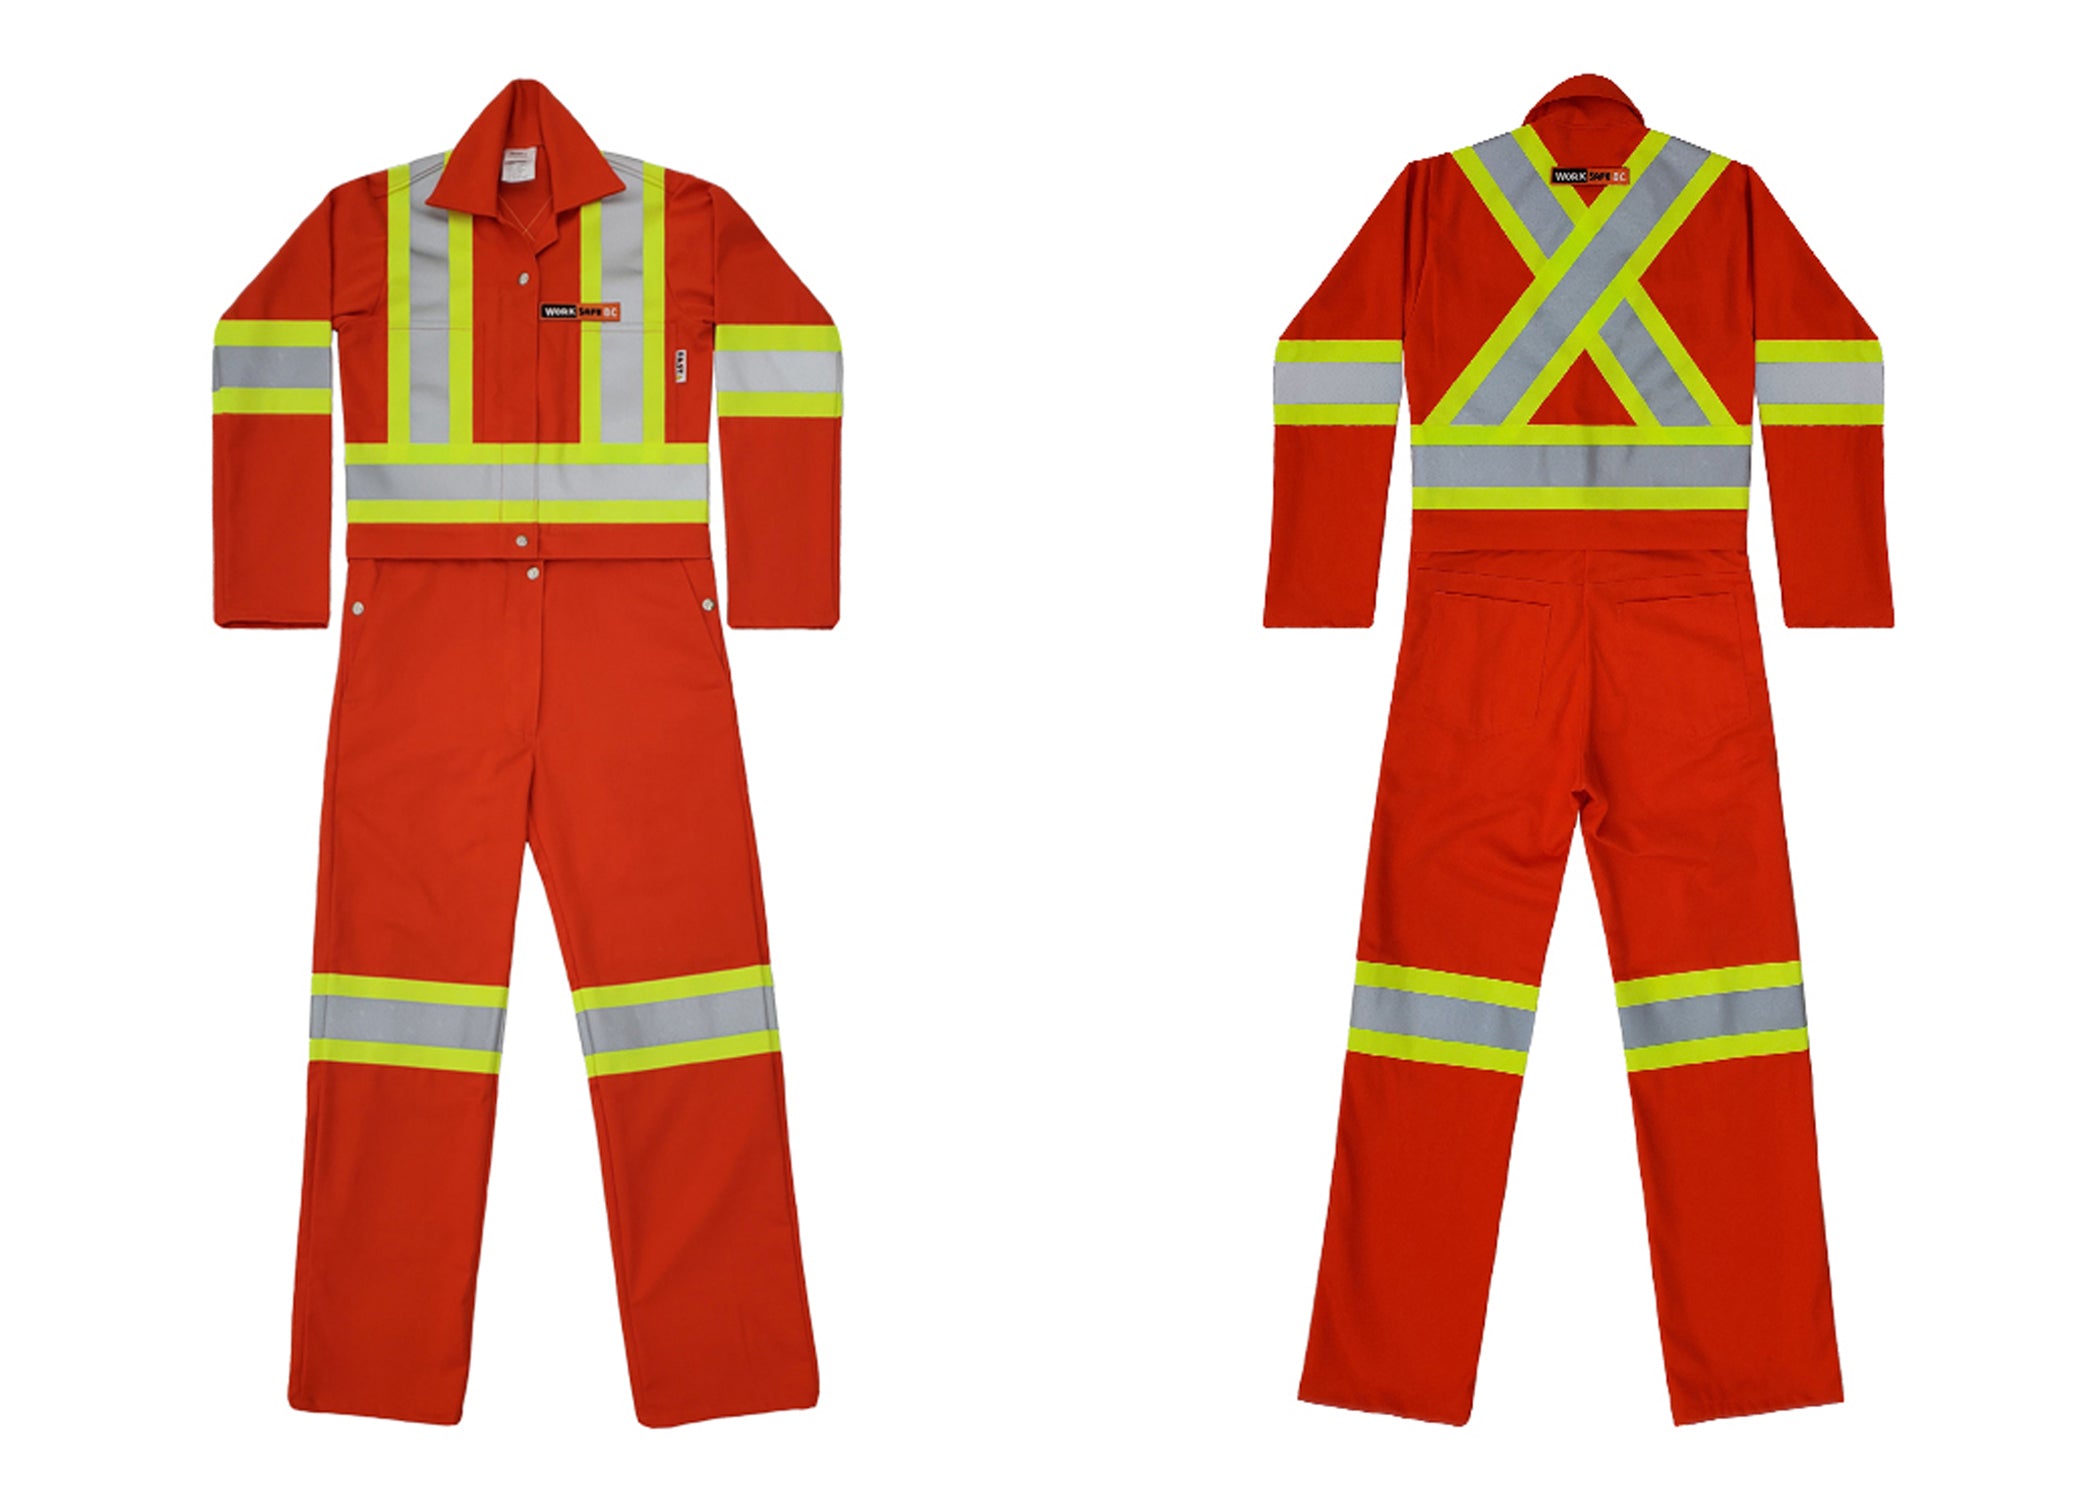 Women's CSA High Visibility Safety Apparel (HVSA)